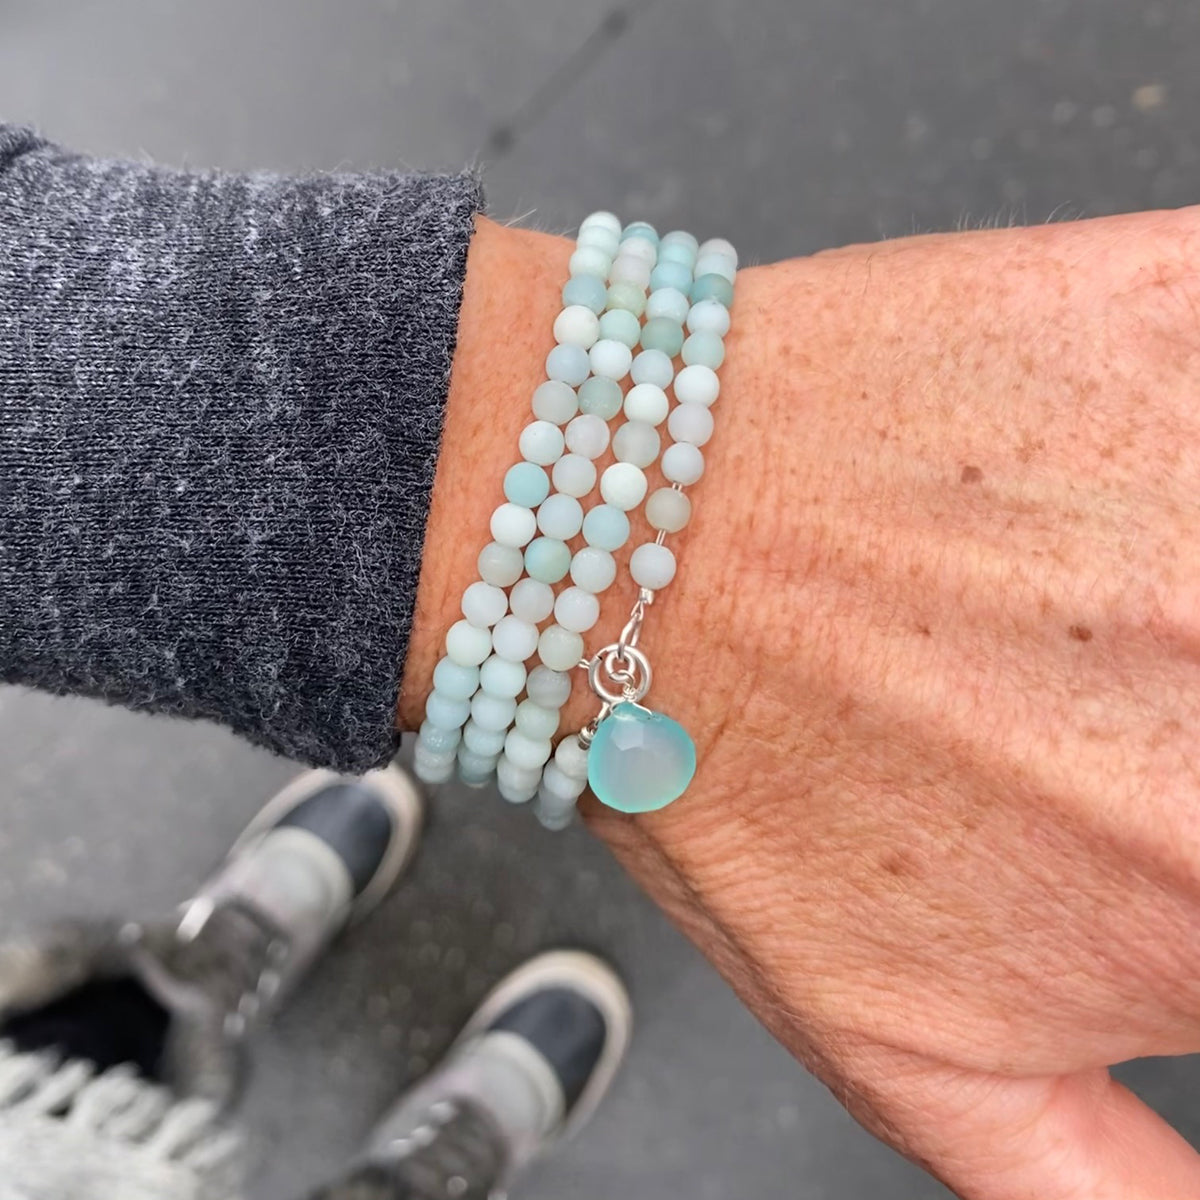 Amazonite Wrap Bracelet to Create a Feeling of Power Within You - Jewelry to Move Beyond FearLife gets tough, but just remember: You can handle anything. Let these motivating gemstone bracelets inspire you to find the strength to overcome the toughest problems life throws at you. 